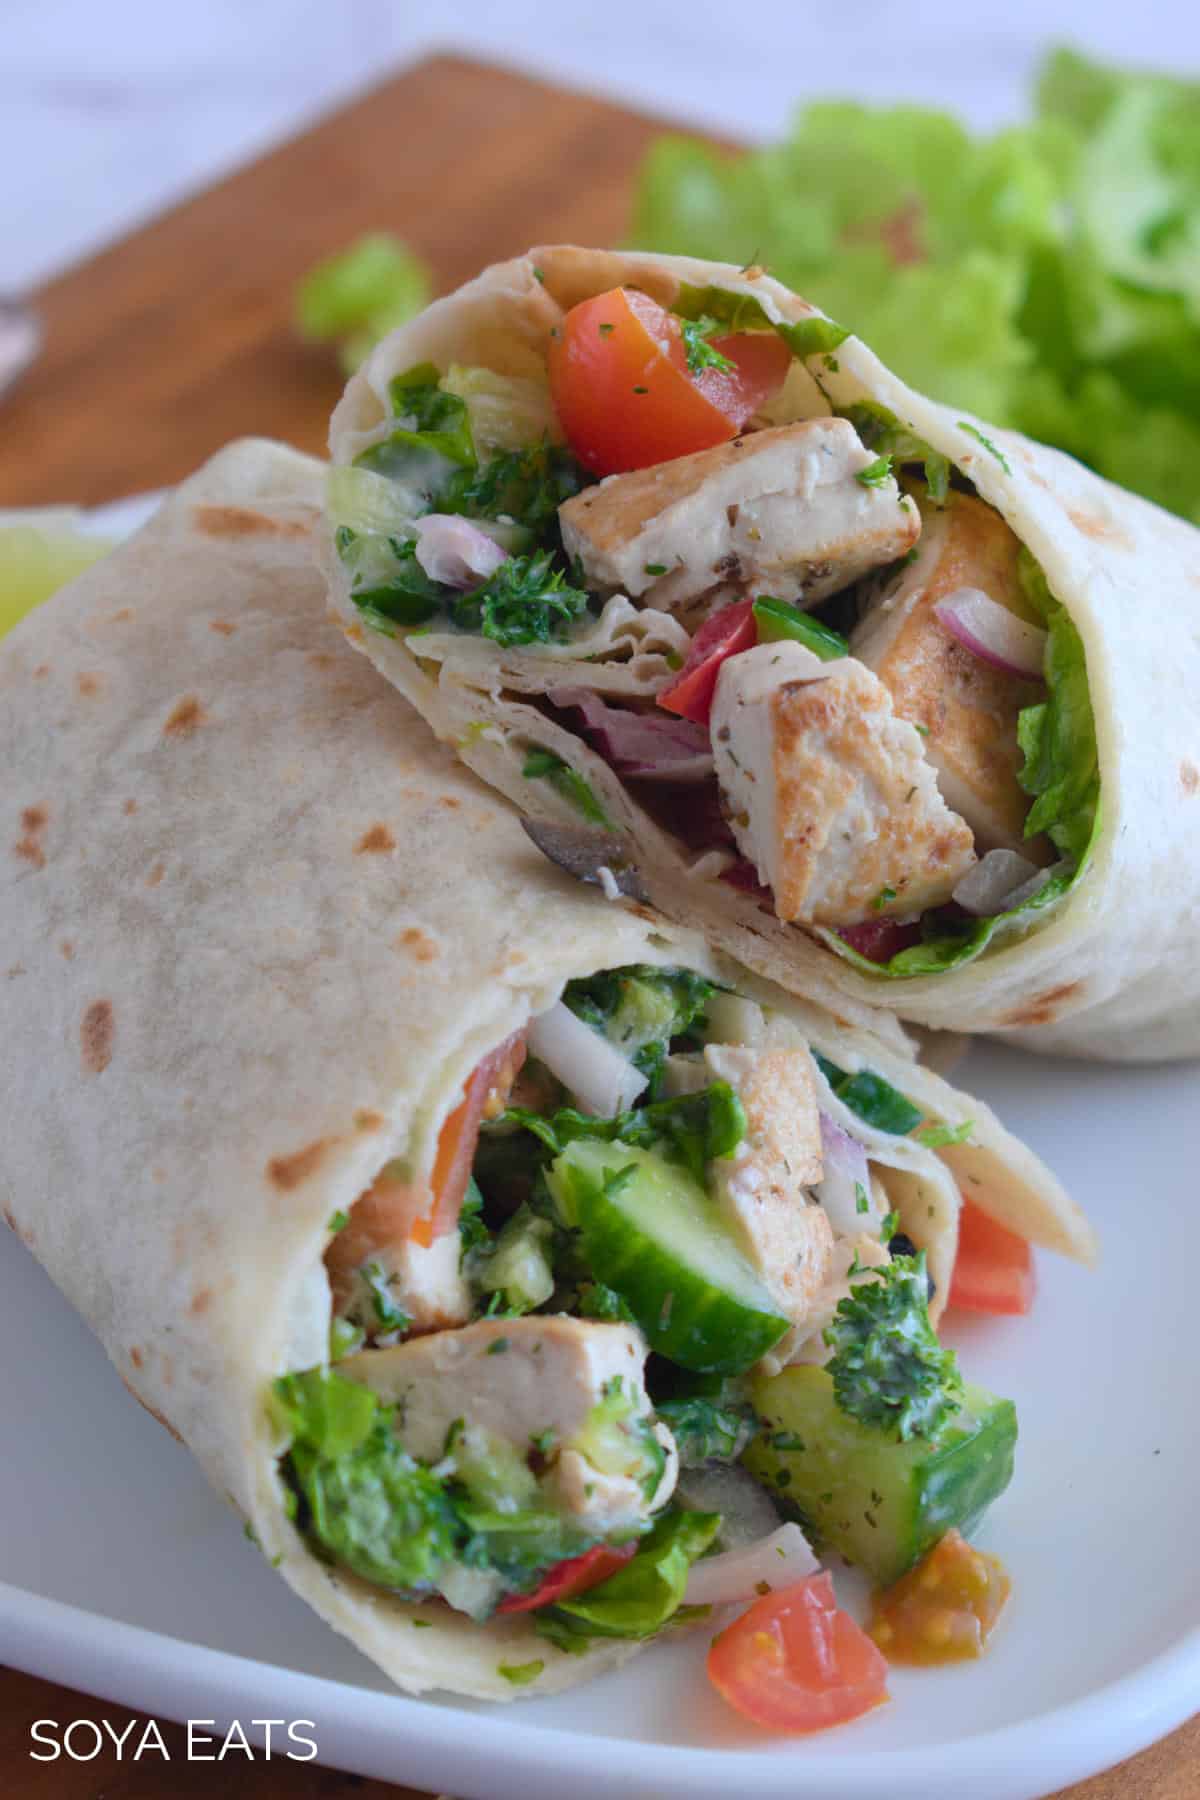 A close up image showing the inside of a cut  vegan Greek wrap.